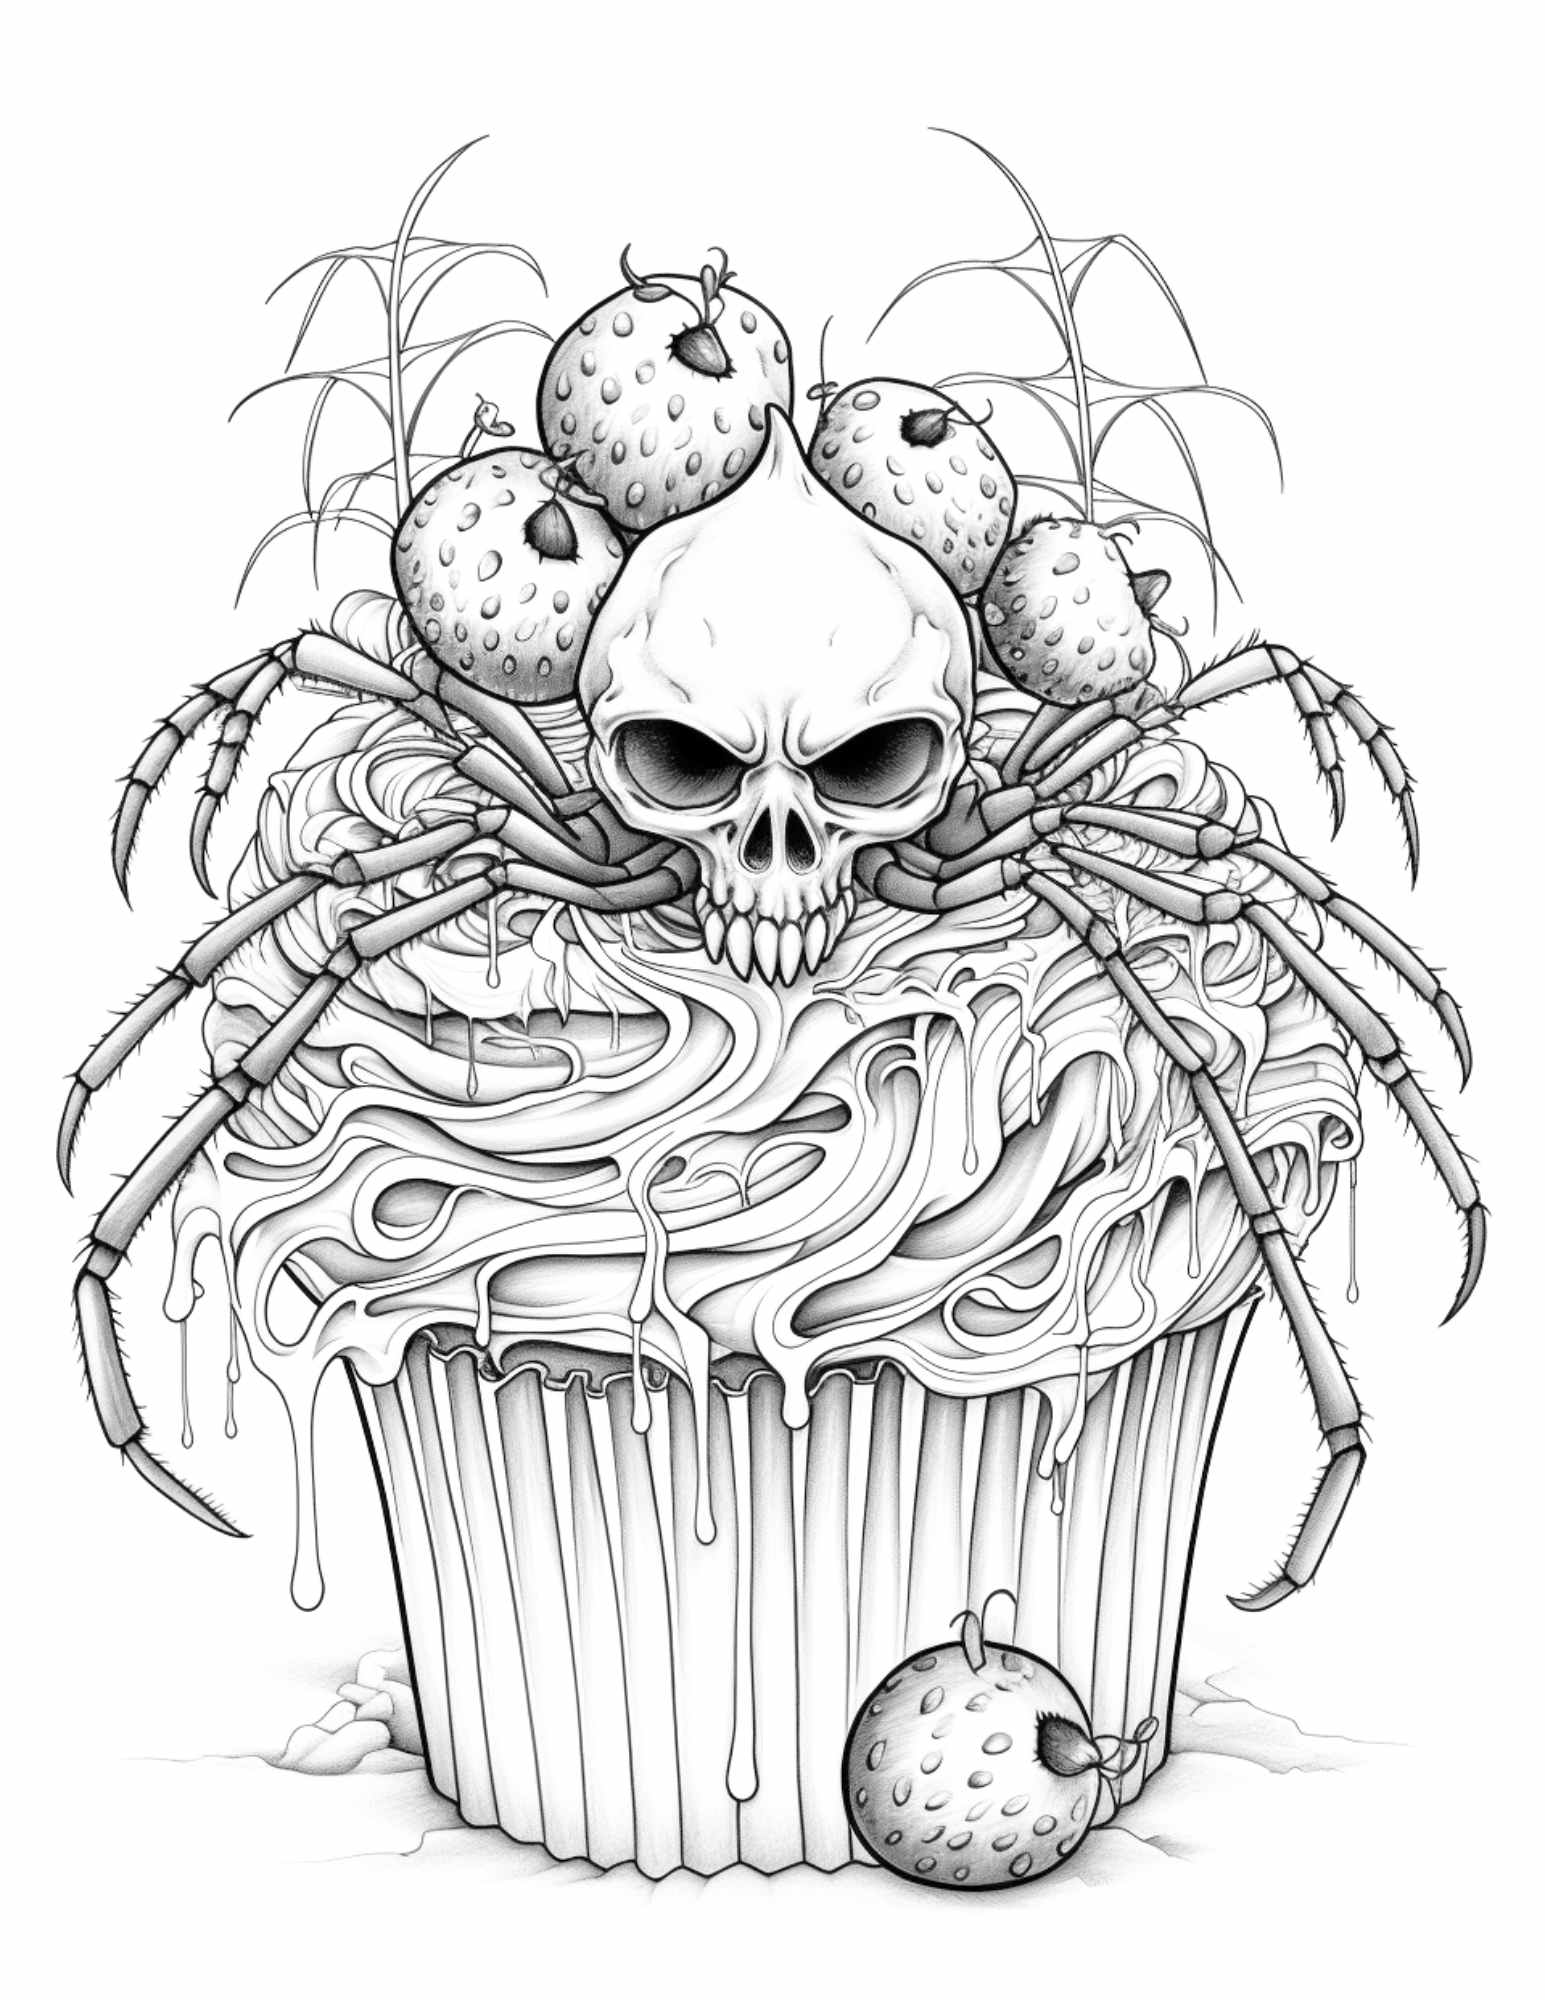 Halloween Spooky Cupcakes Coloring Pages, Free Grayscale Coloring Sheets, Printable Halloween Coloring Pages, Kids and Adults Coloring Activity, Halloween Cupcake Art